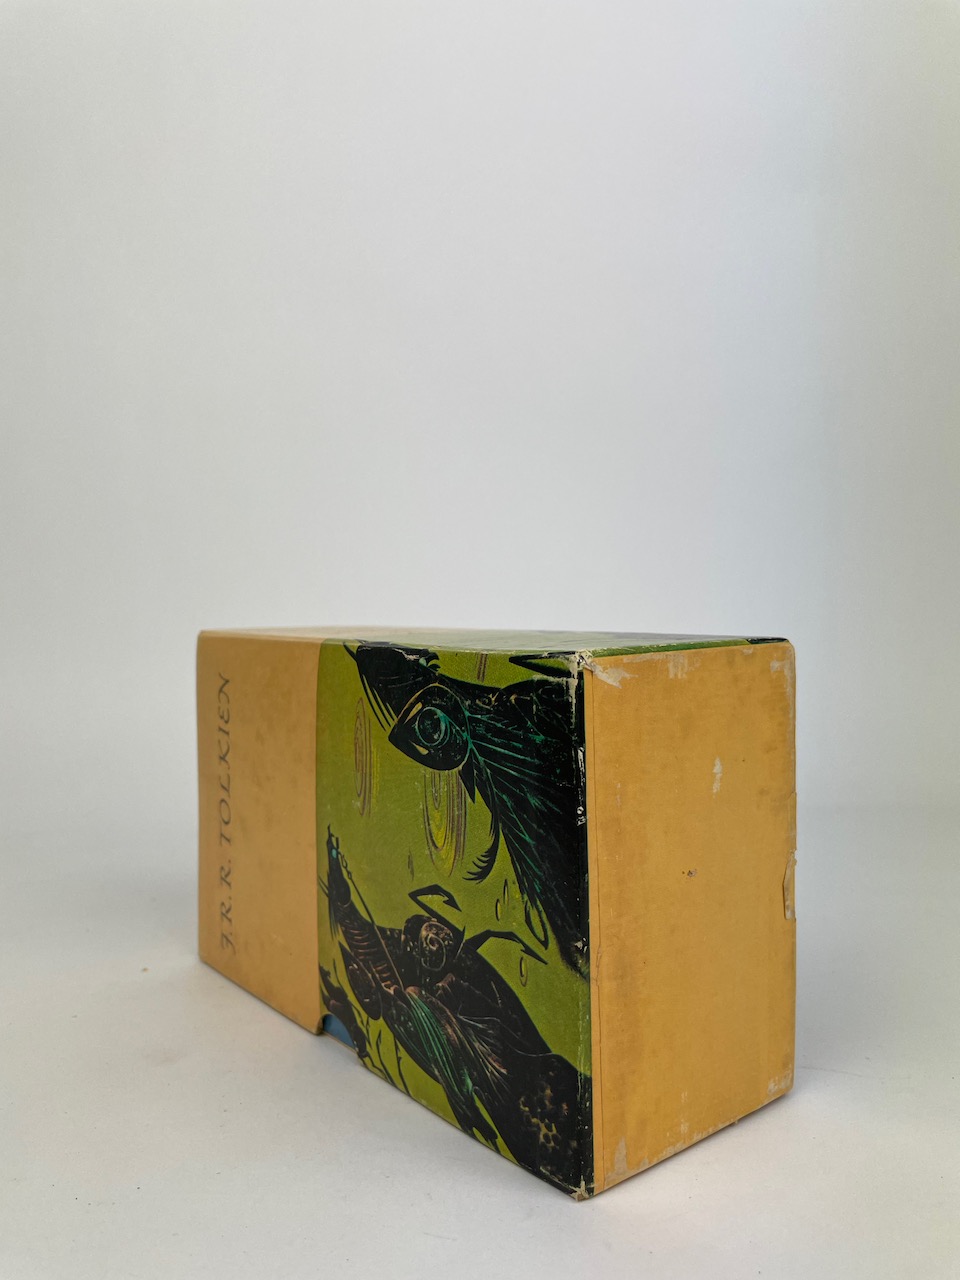 J.R.R. Tolkien, The Lord of the Rings in slipcase released in 1973 by Methuen Publications 6